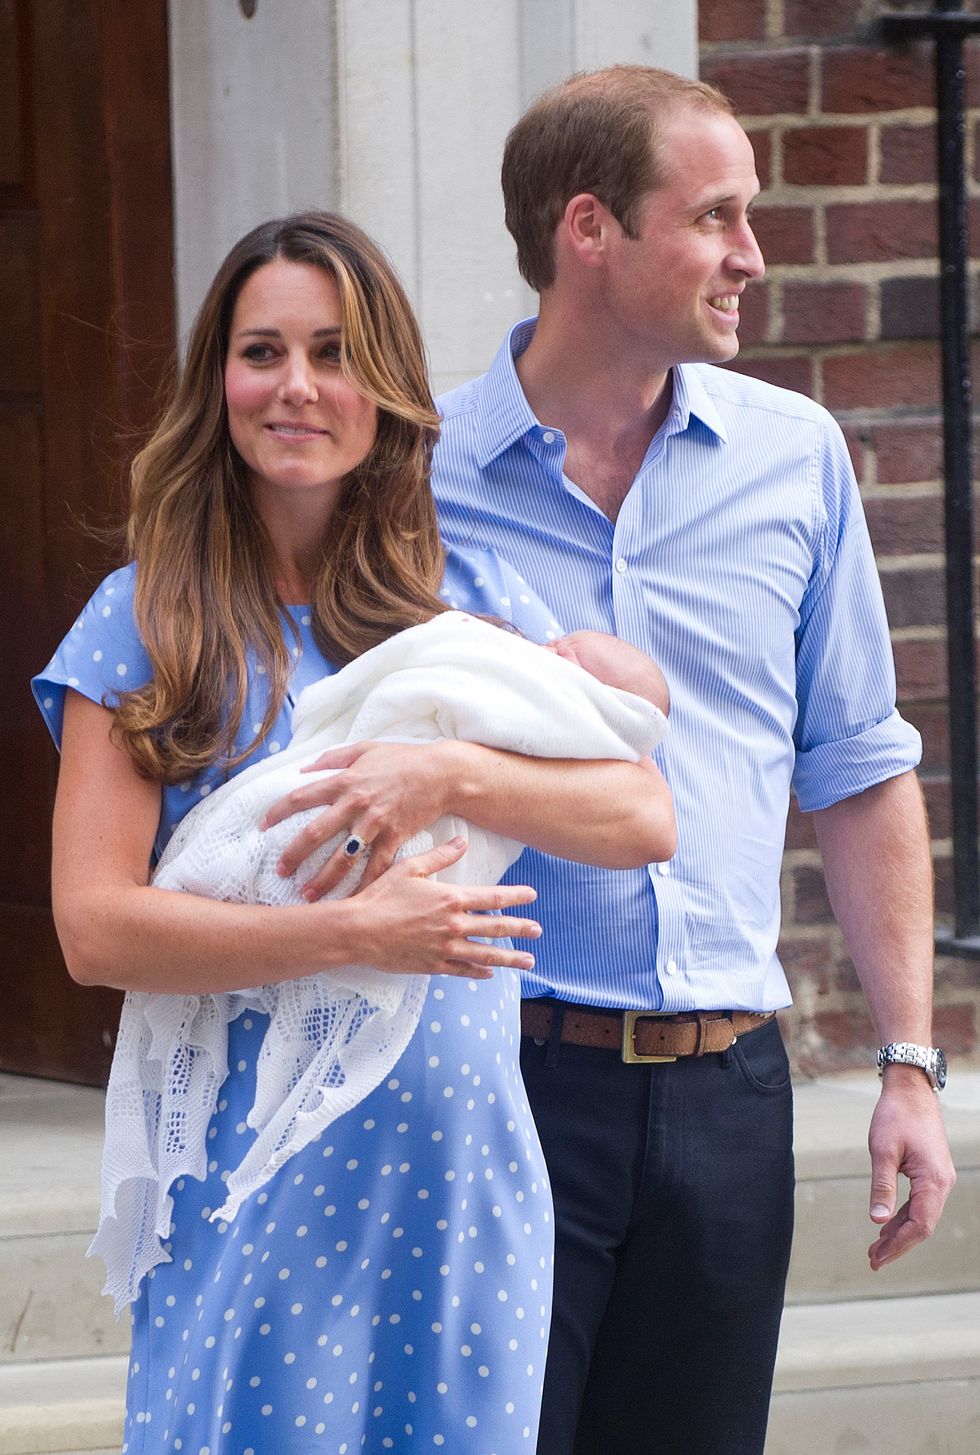 uk   the birth of prince george in london